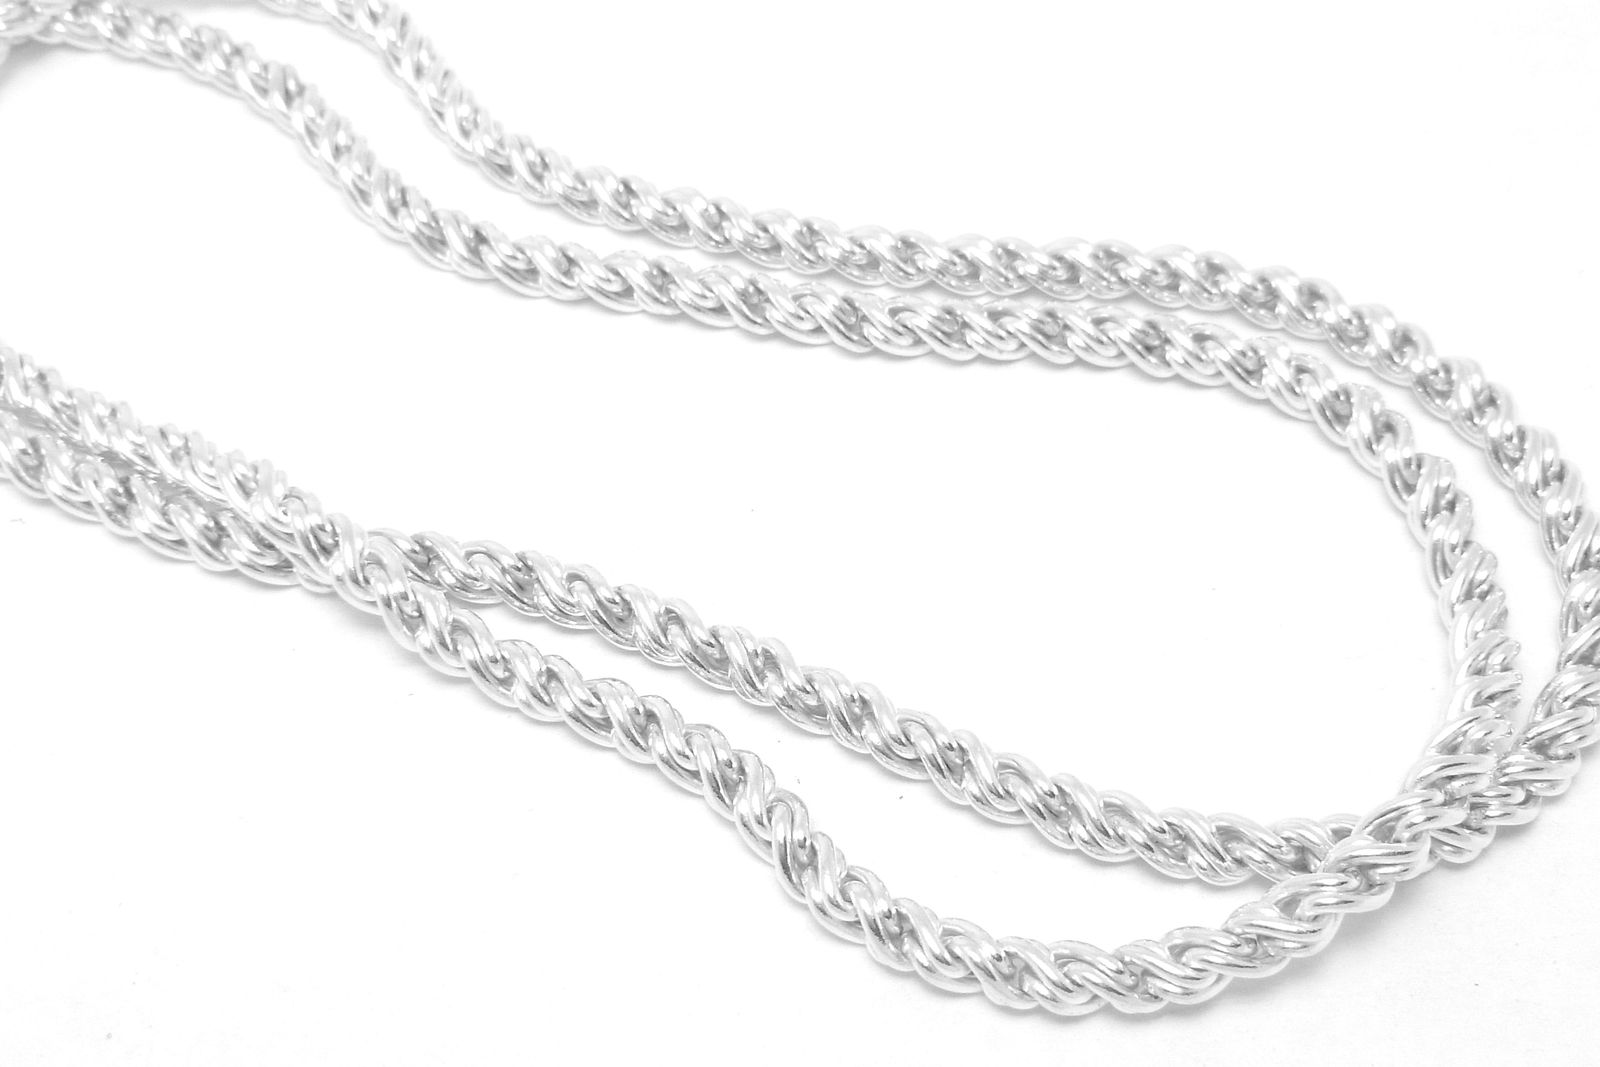 Sterling Silver  24" Reverse Rope Spiral Design Chain Necklace - $89.00